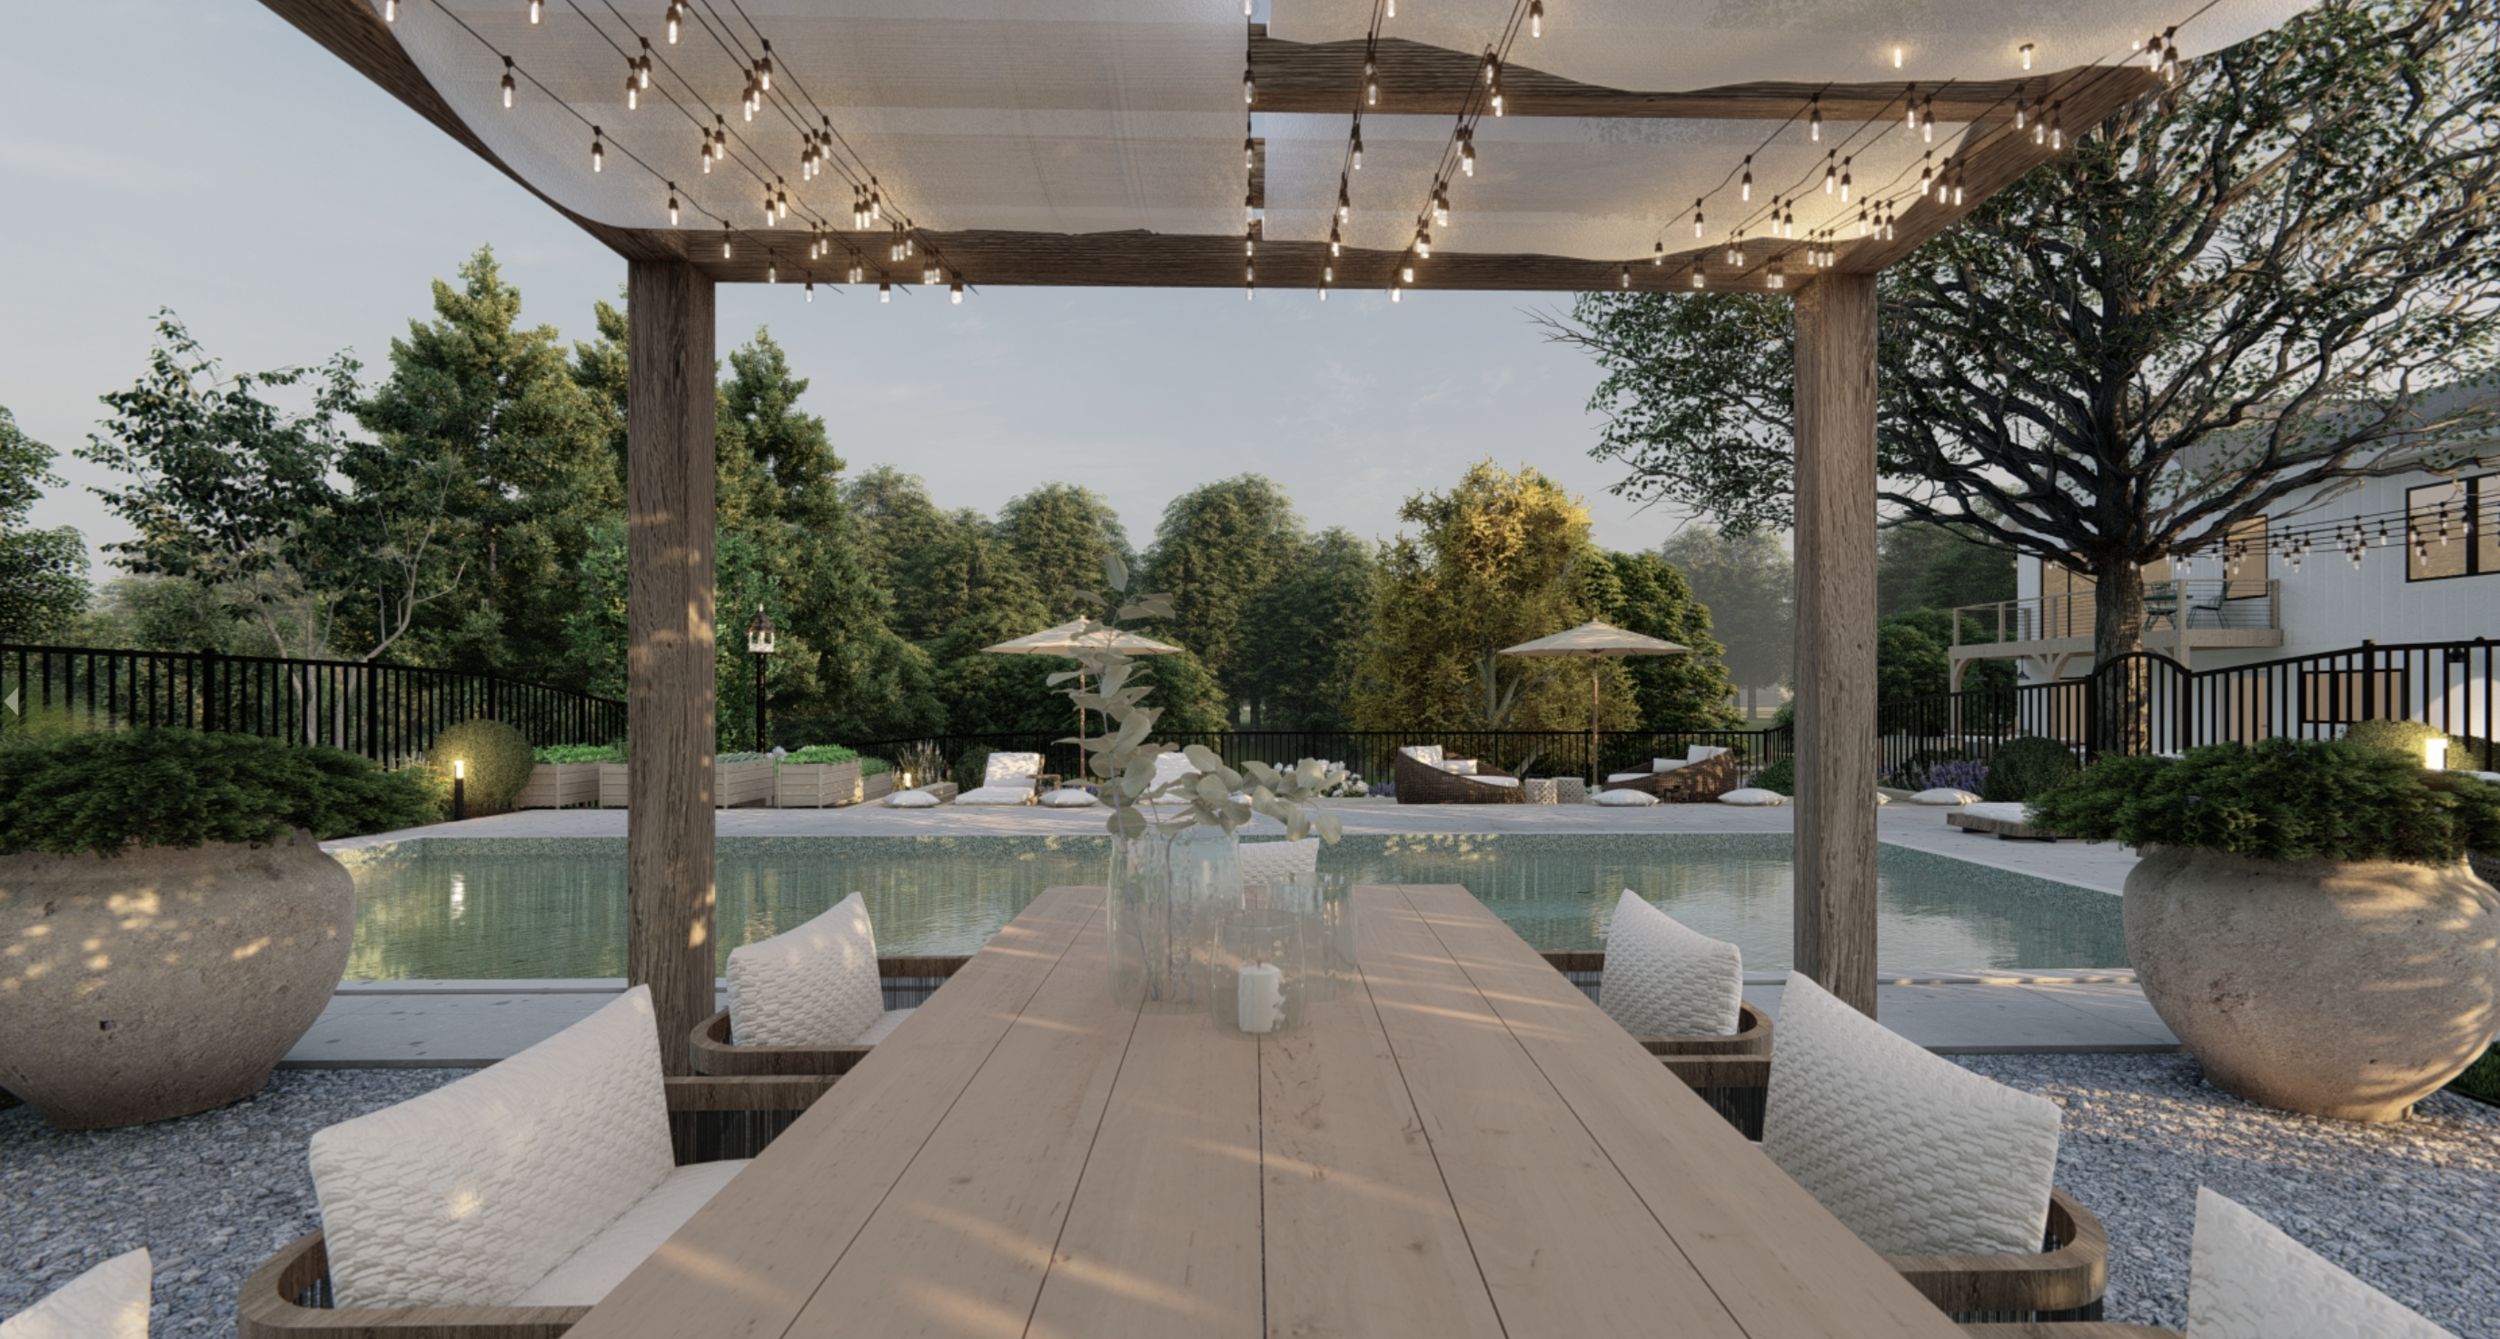 Dining table under shaded pergola and heated swimming pool in Walden, NY landscape design.